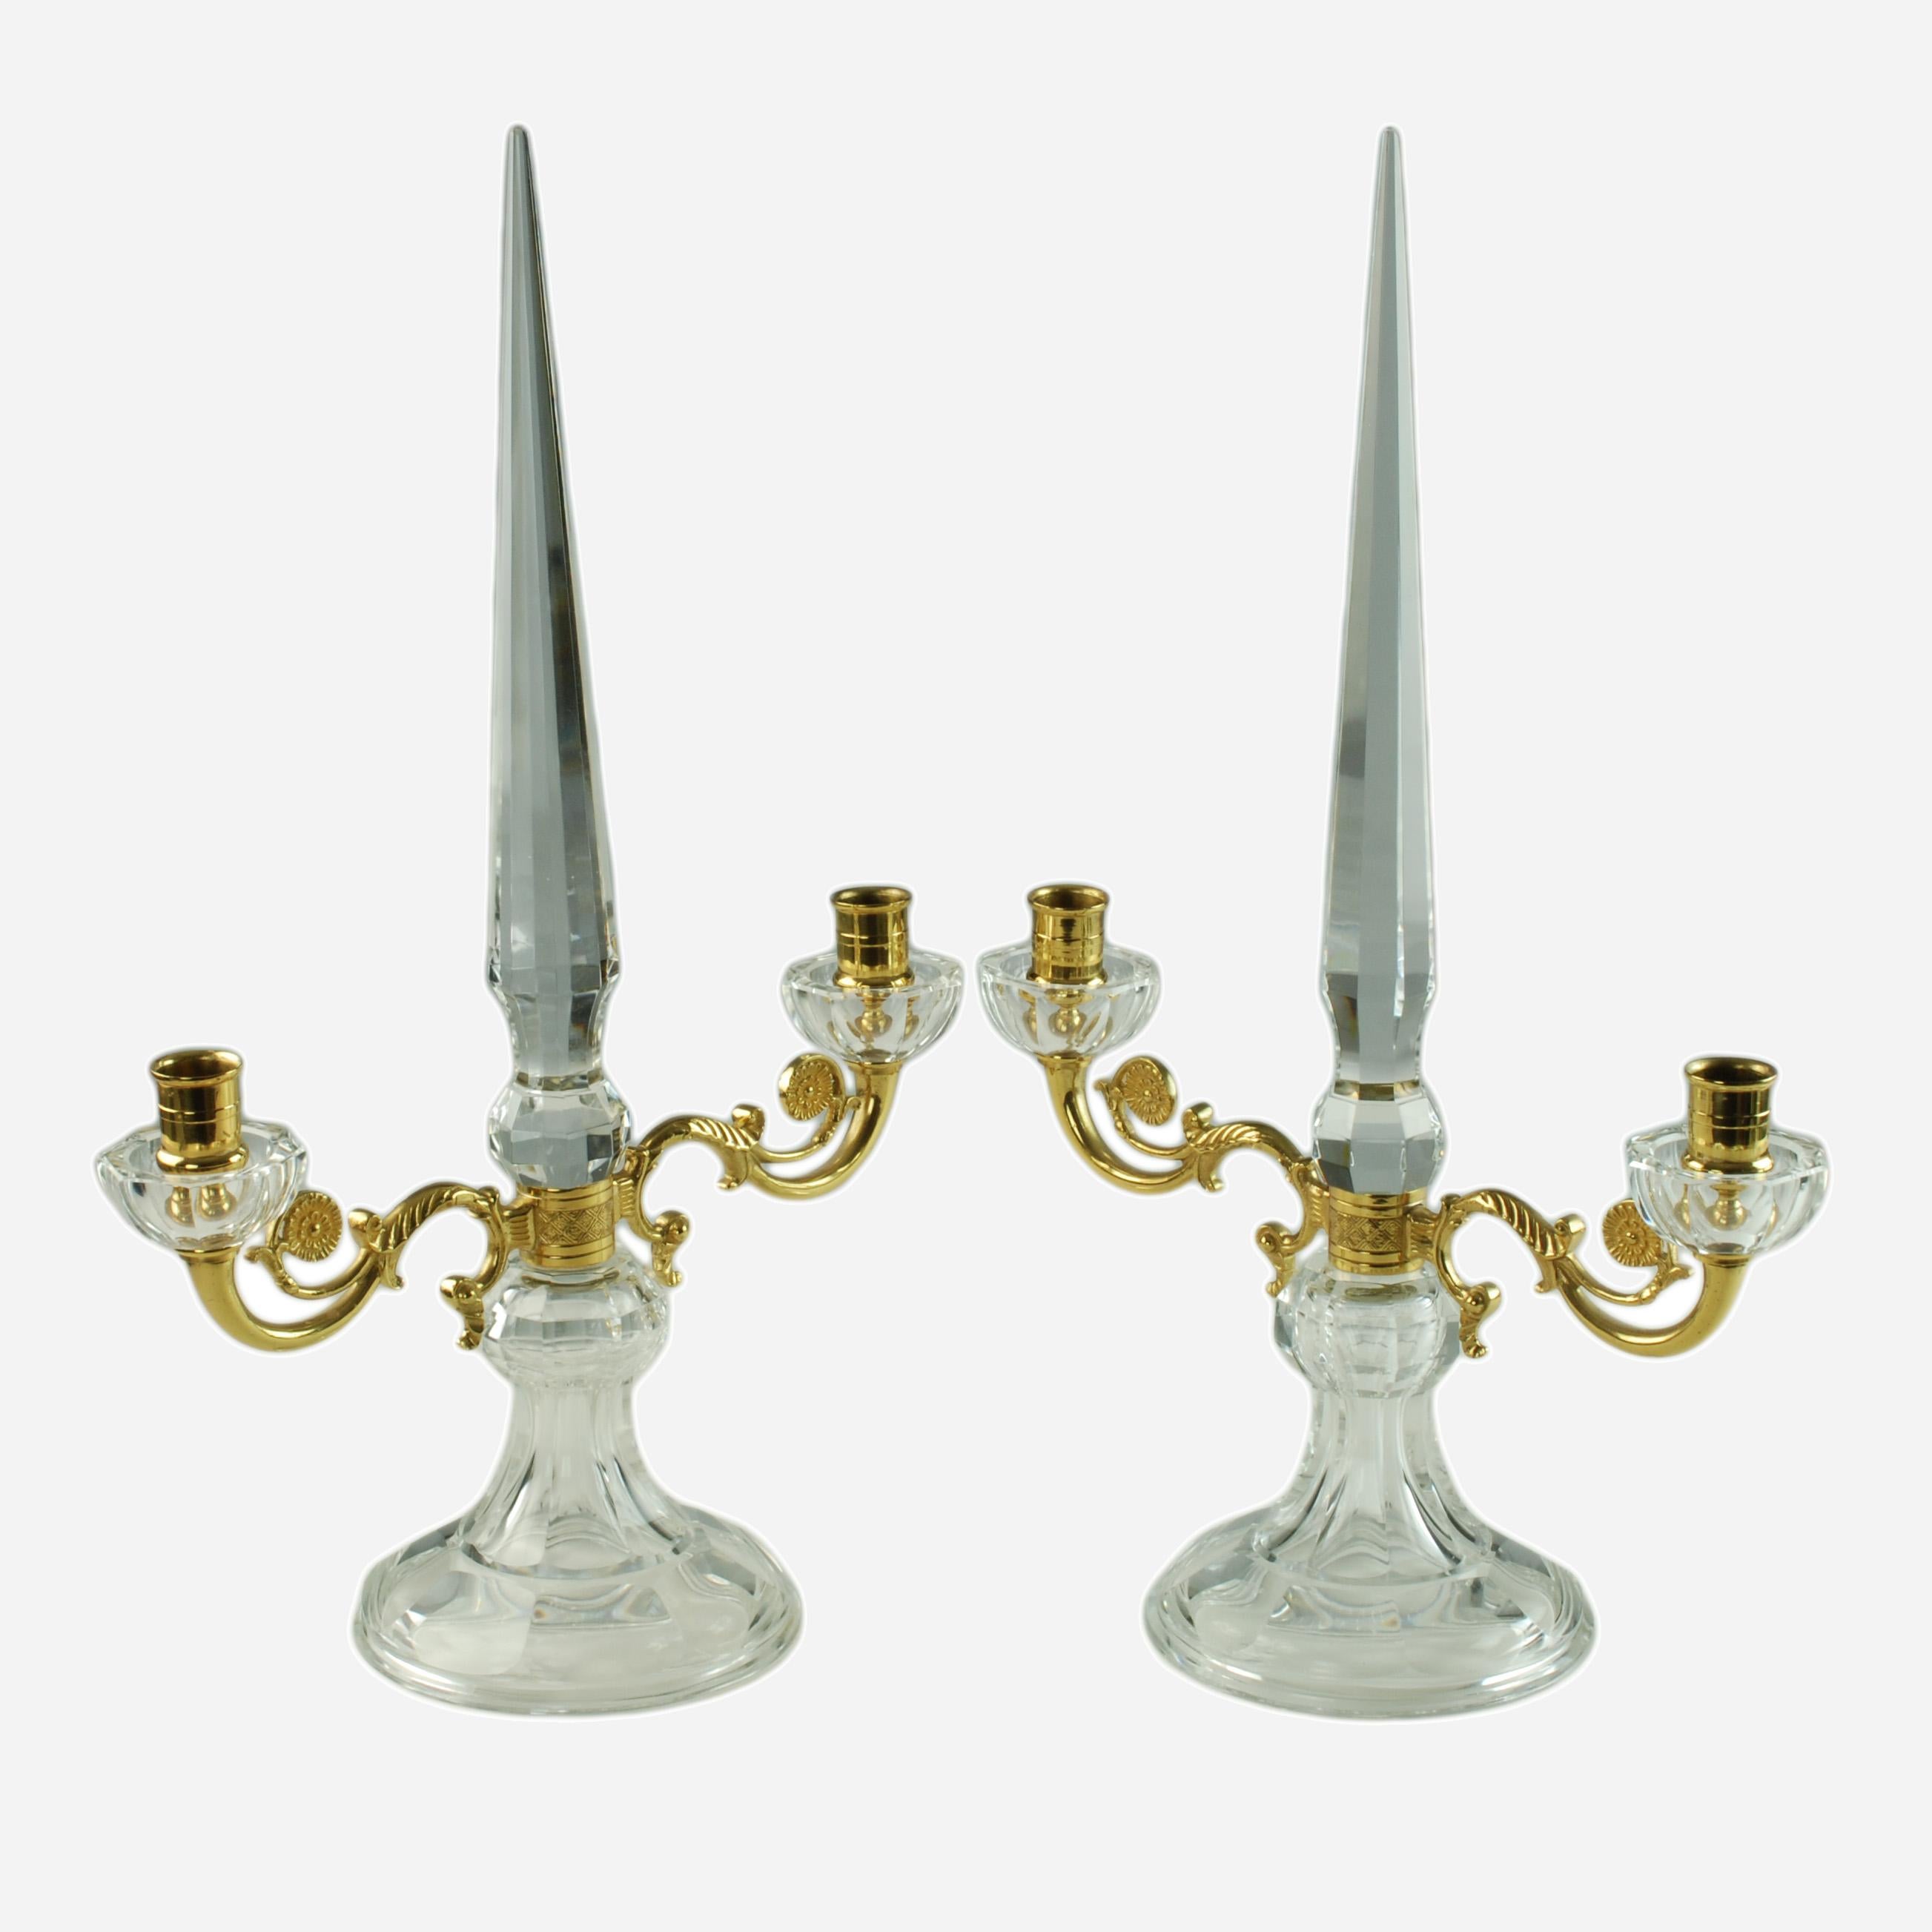 This graceful pair of French crystal candelabra features tall, tapered spike-form finials with panelled sides. The pieces have scrolling bronze doré arms finished with disc shaped accents decorated with embossed foliate detail best seen in image 8.